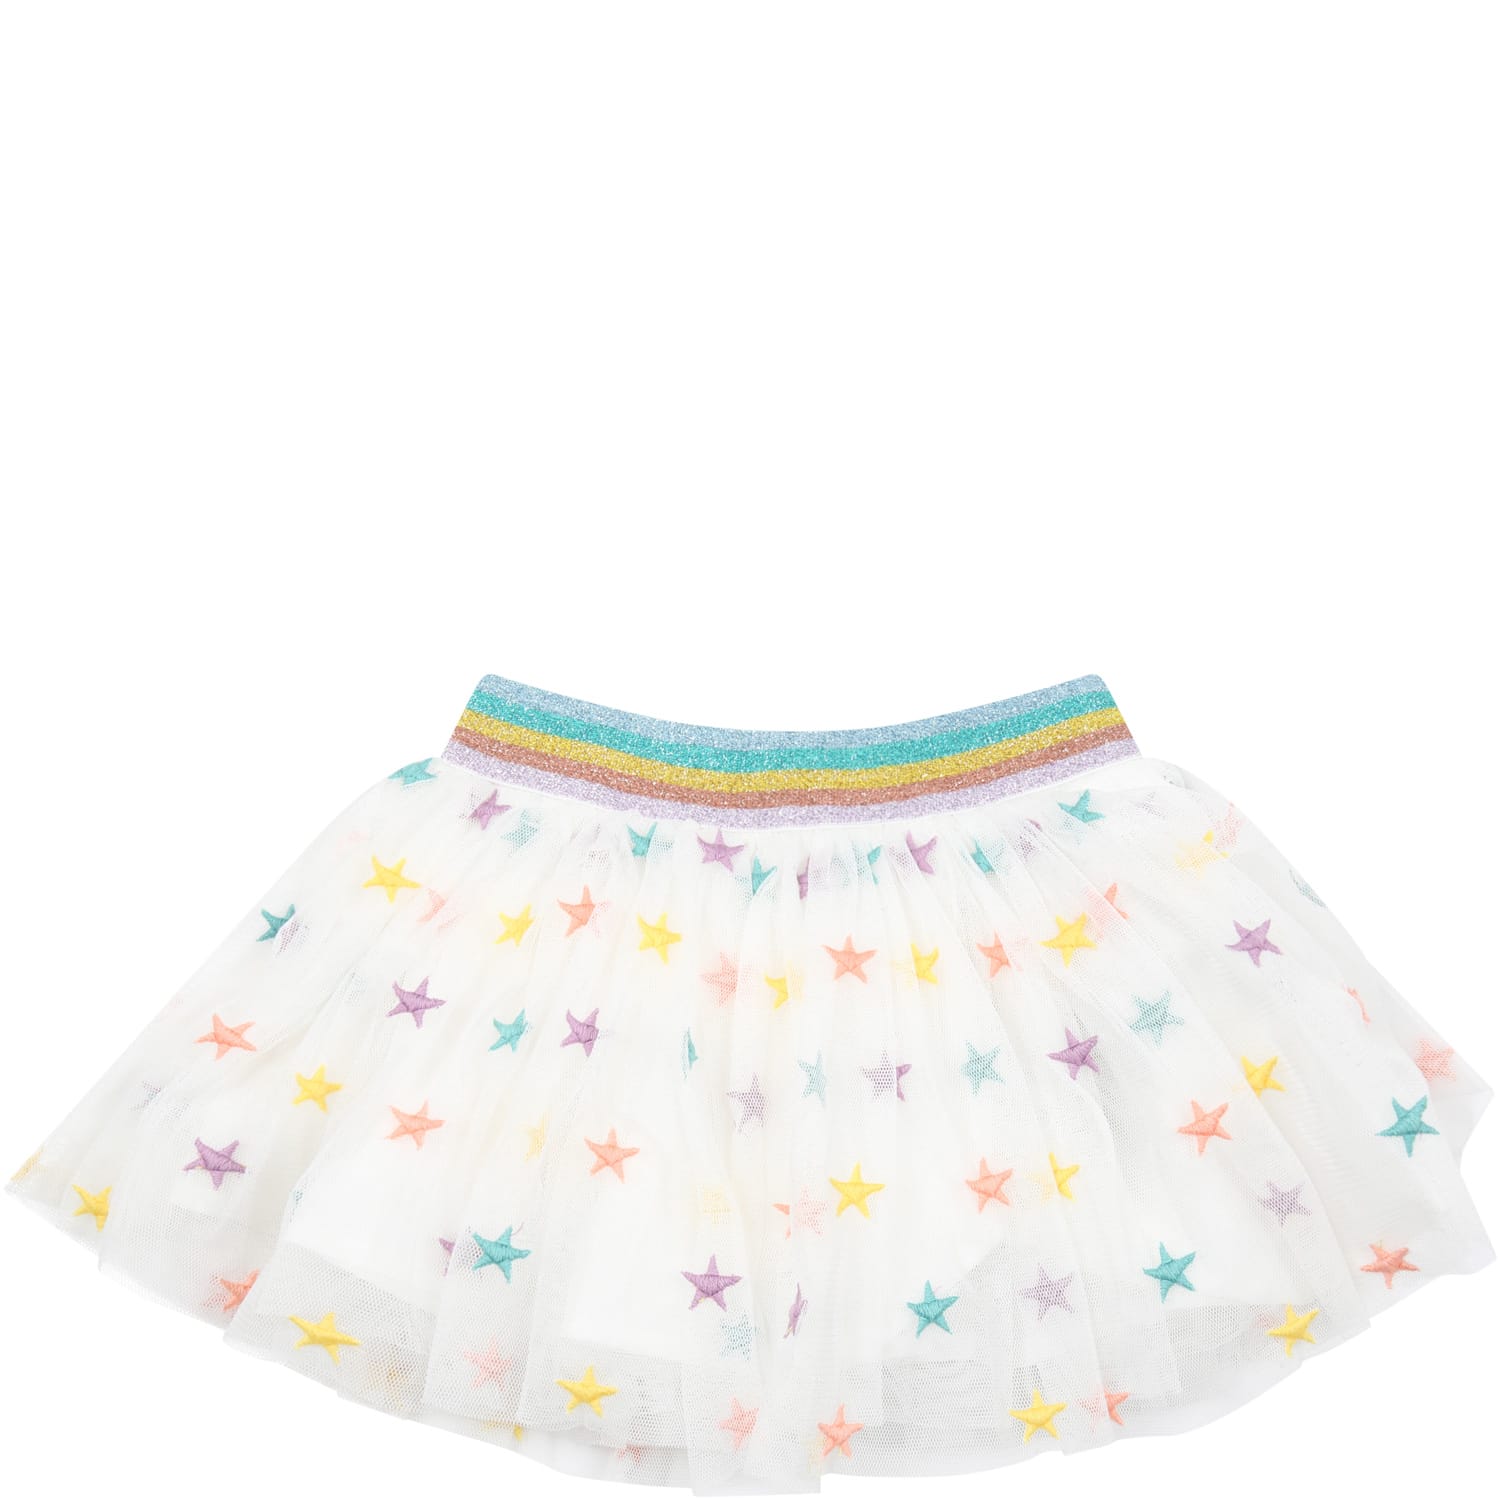 Stella McCartney Kids White Skirt For Baby Girl With Colorful Stars